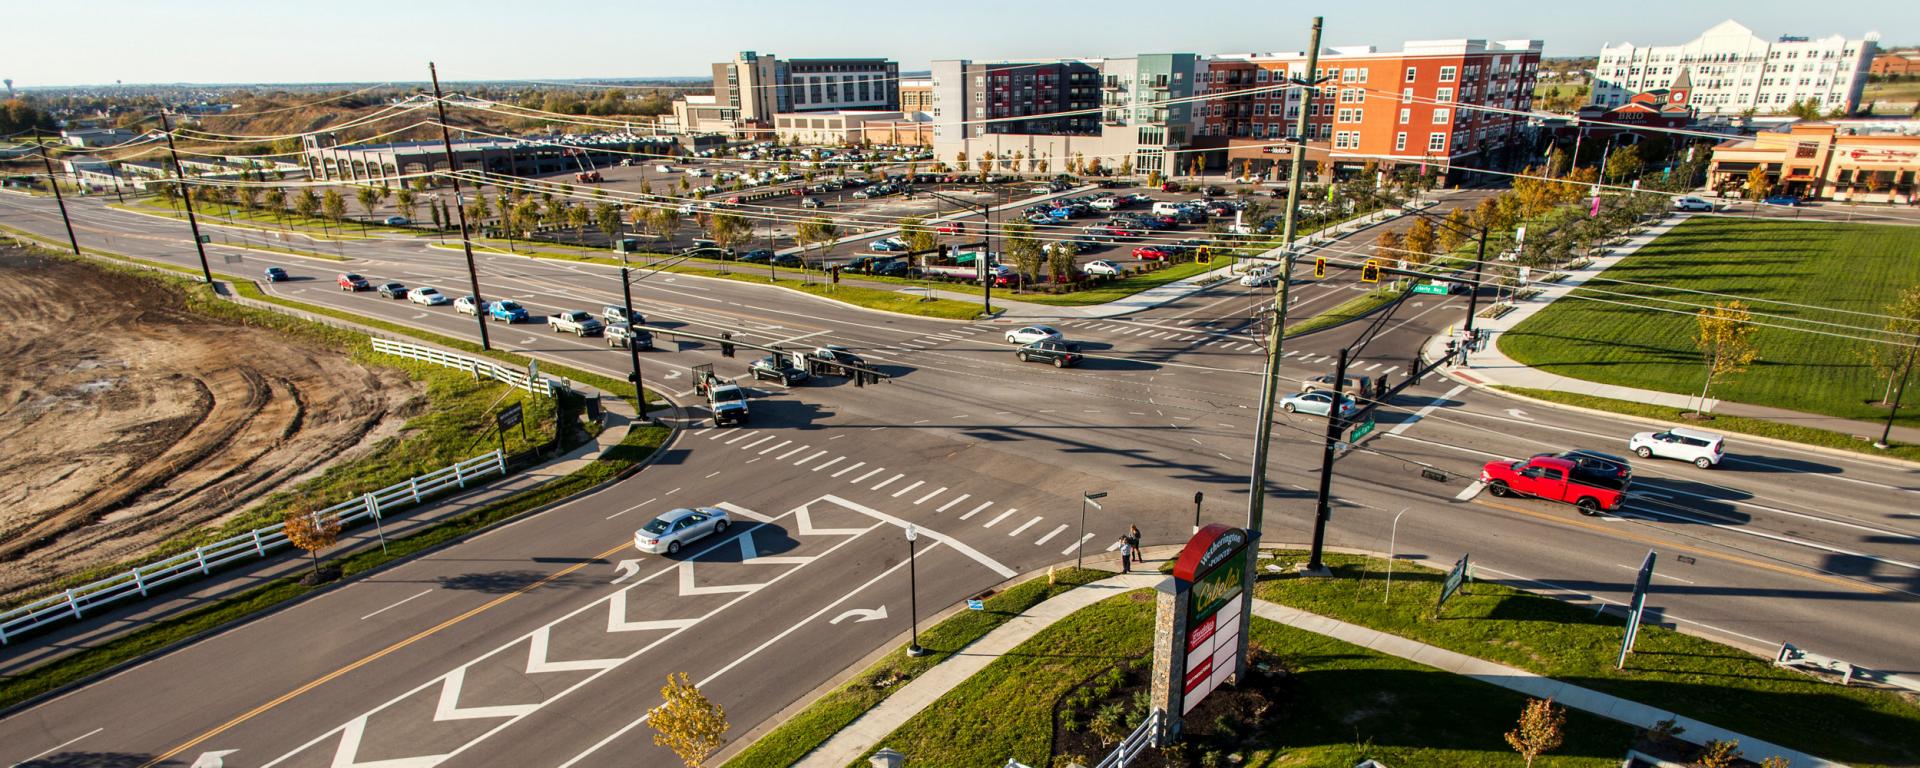 roadway intersection with shopping center development on one side